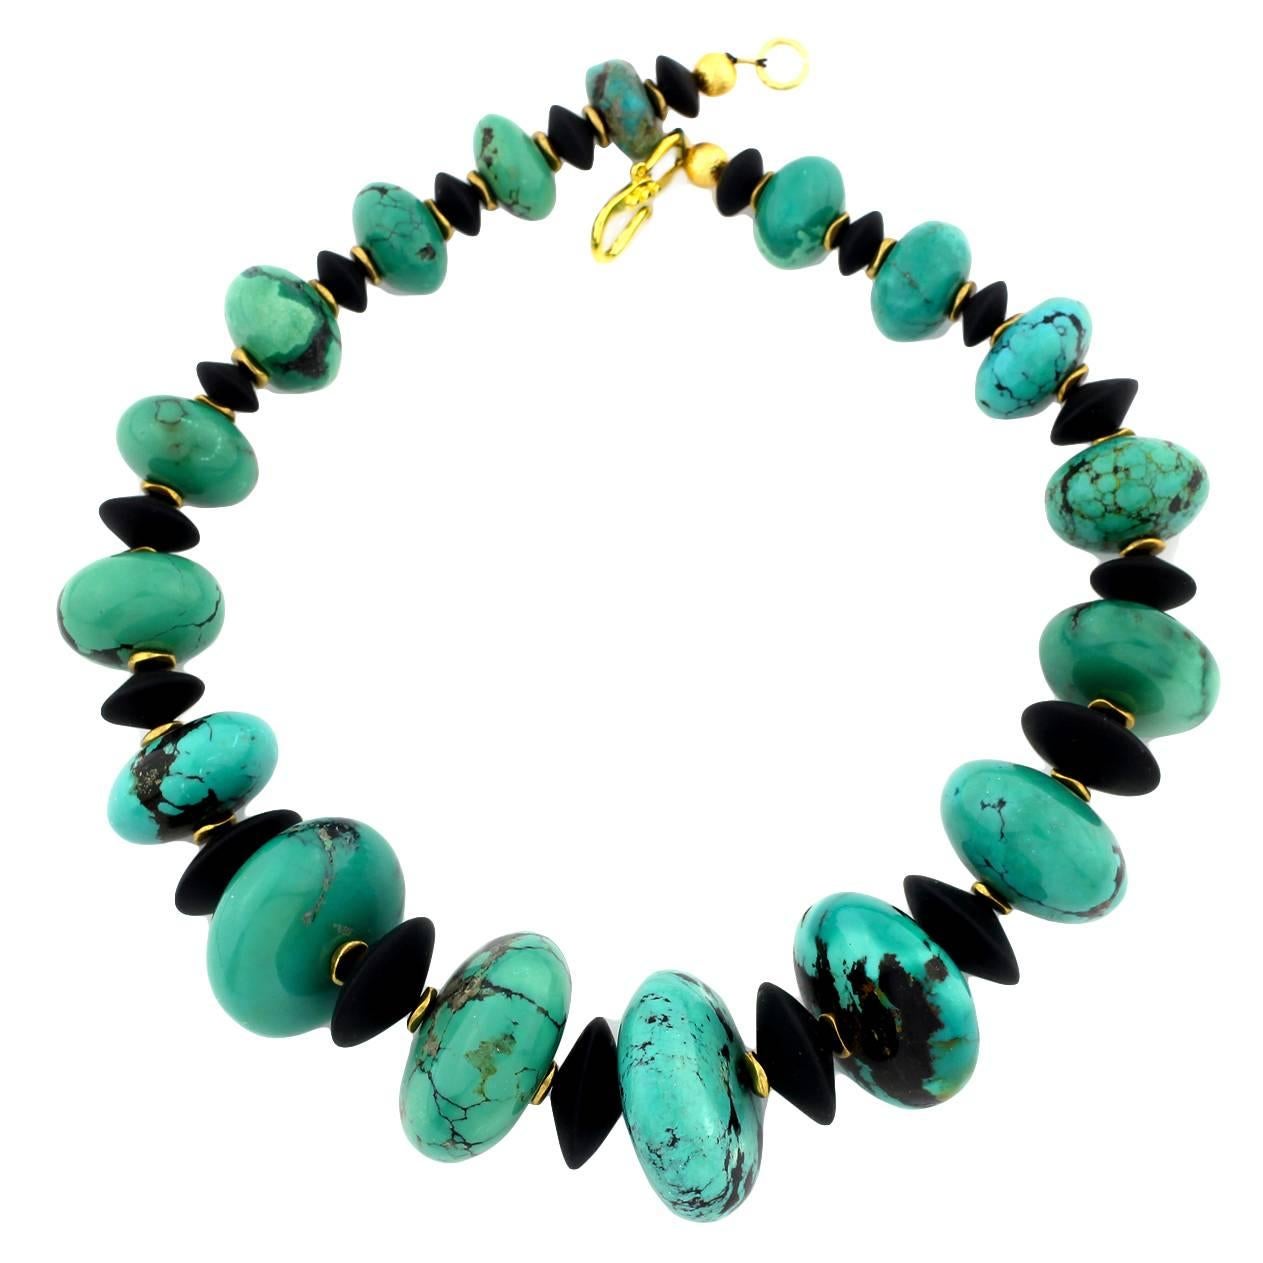 AJD Dramatic Statement Natural Glowing American Turquoise & Black Onyx Necklace